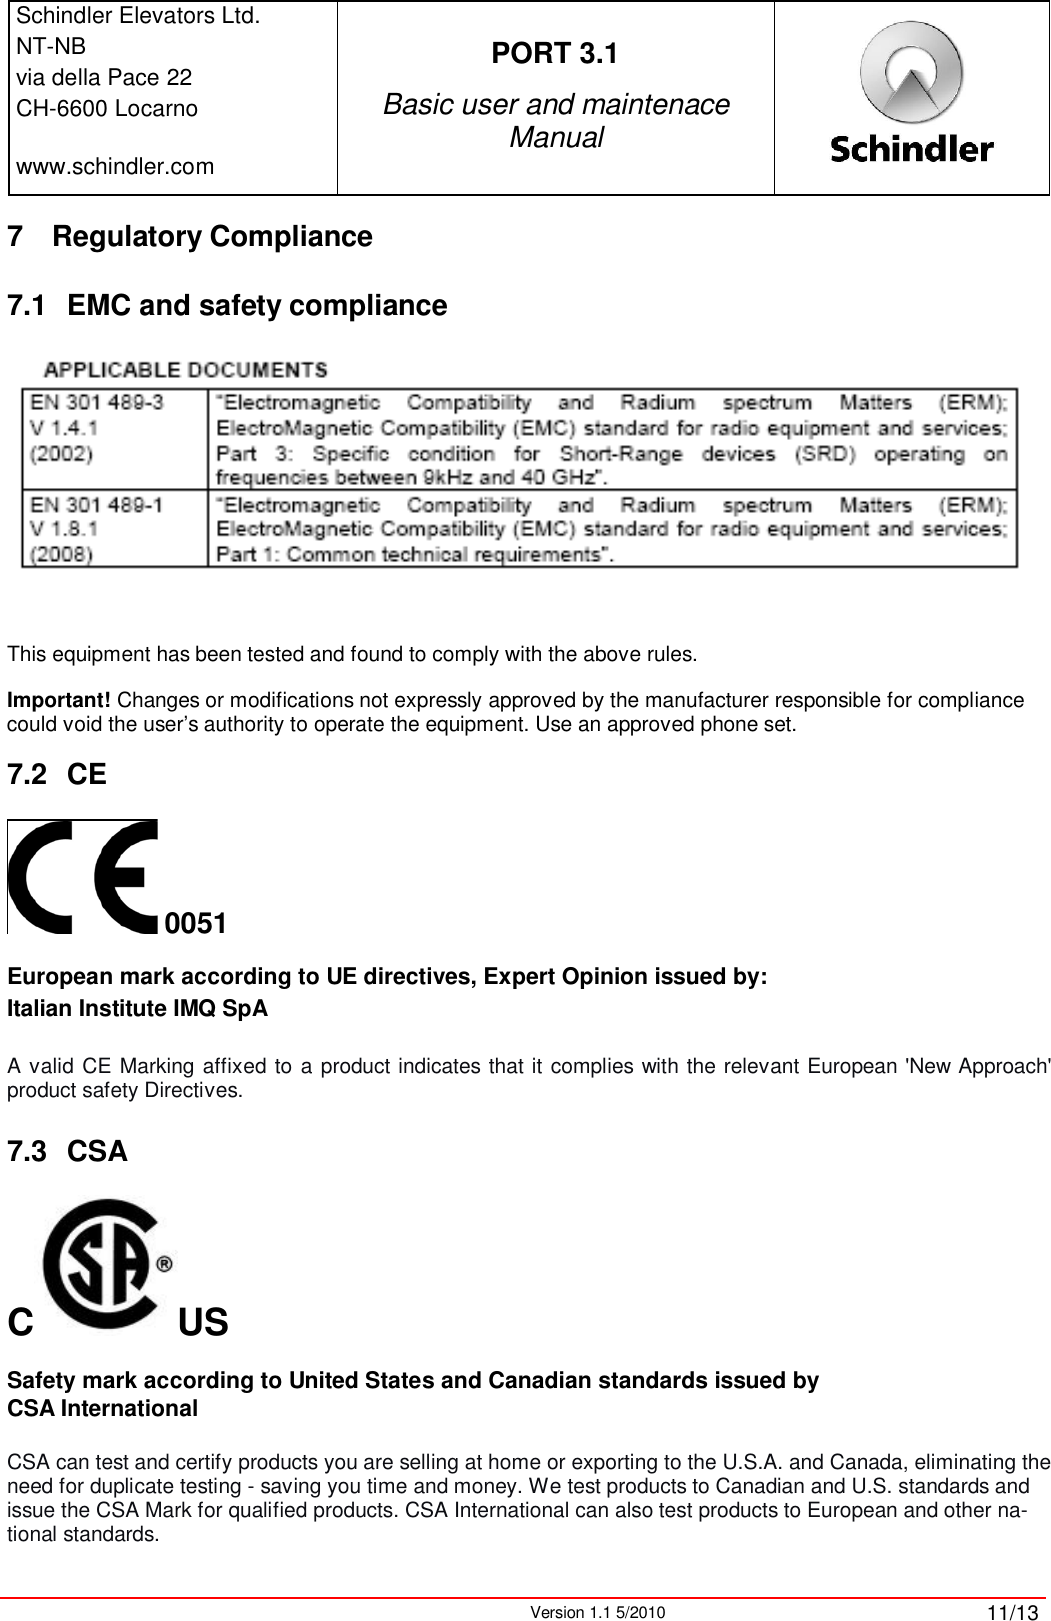 Schindler Elevators Ltd.NT-NBvia della Pace 22CH-6600 Locarnowww.schindler.comPORT 3.1Basic user and maintenace ManualVersion 1.1 5/2010 11/137 Regulatory Compliance 7.1 EMC and safety complianceThis equipment has been tested and found to comply with the above rules. Important! Changes or modifications not expressly approved by the manufacturer responsible for compliance could void the user’s authority to operate the equipment. Use an approved phone set. 7.2 CE0051European mark according to UE directives, Expert Opinion issued by:Italian Institute IMQ SpAA valid CE Marking affixed to a product indicates that it complies with the relevant European &apos;New Approach&apos; product safety Directives.7.3 CSAC USSafety mark according to United States and Canadian standards issued by CSA InternationalCSA can test and certify products you are selling at home or exporting to the U.S.A. and Canada, eliminating the need for duplicate testing - saving you time and money. We test products to Canadian and U.S. standards and issue the CSA Mark for qualified products. CSA International can also test products to European and other na-tional standards.